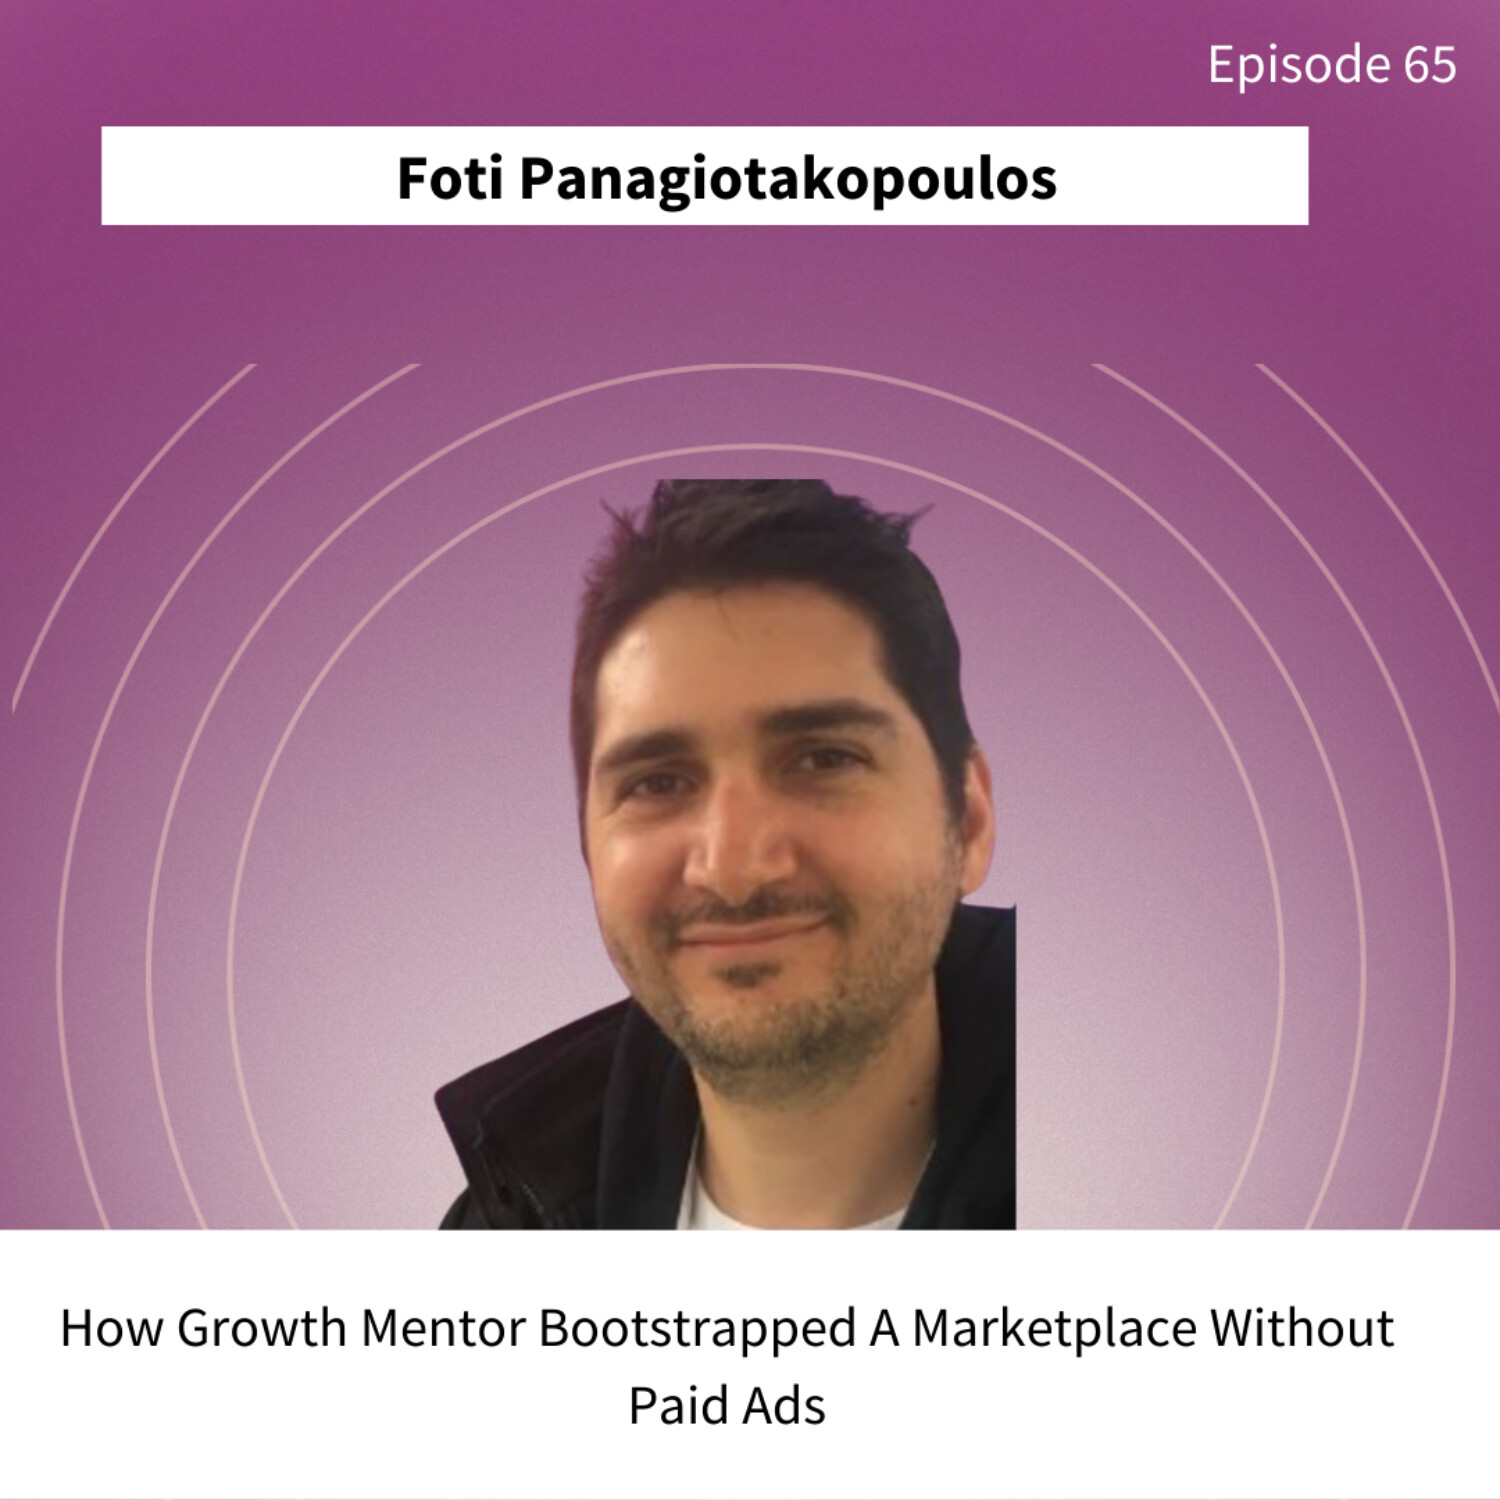 How Growth Mentor Bootstrapped A Marketplace Without Paid Ads